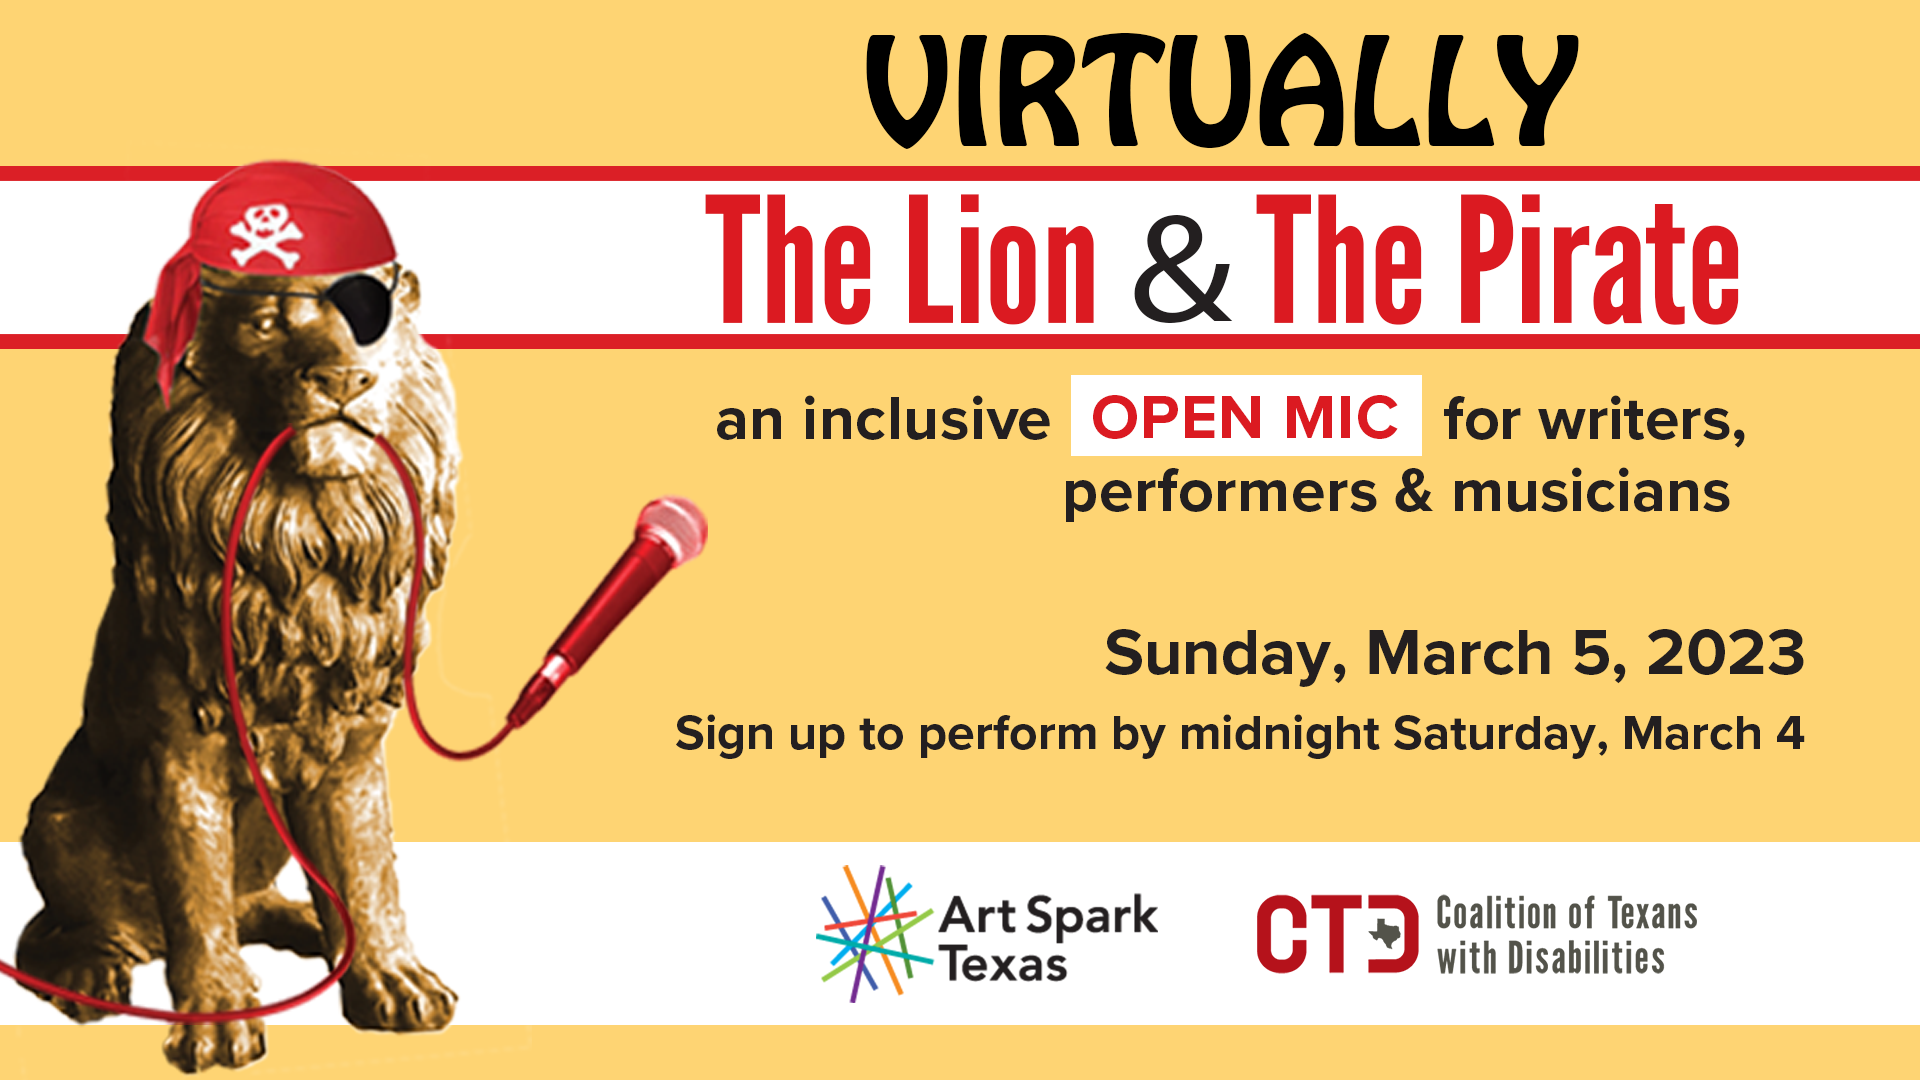 Statue of Lion wearing black pirate hat and eye mask next to event title on mustard background.